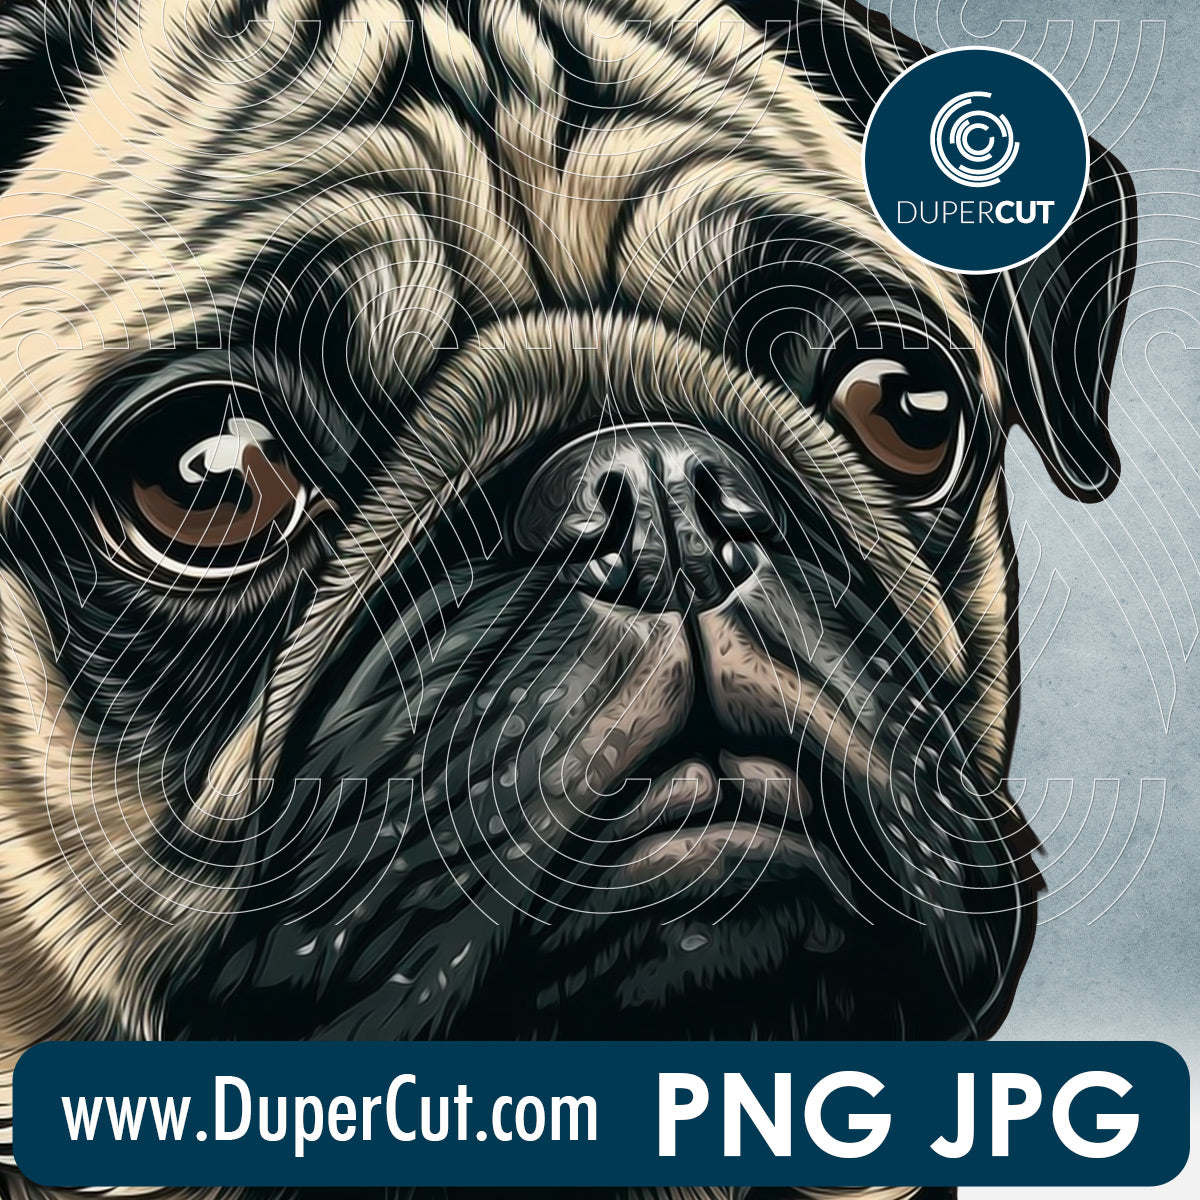 Pug dog breed high resolution template - JPG PNG sublimation files transparent background by www.DuperCut.com